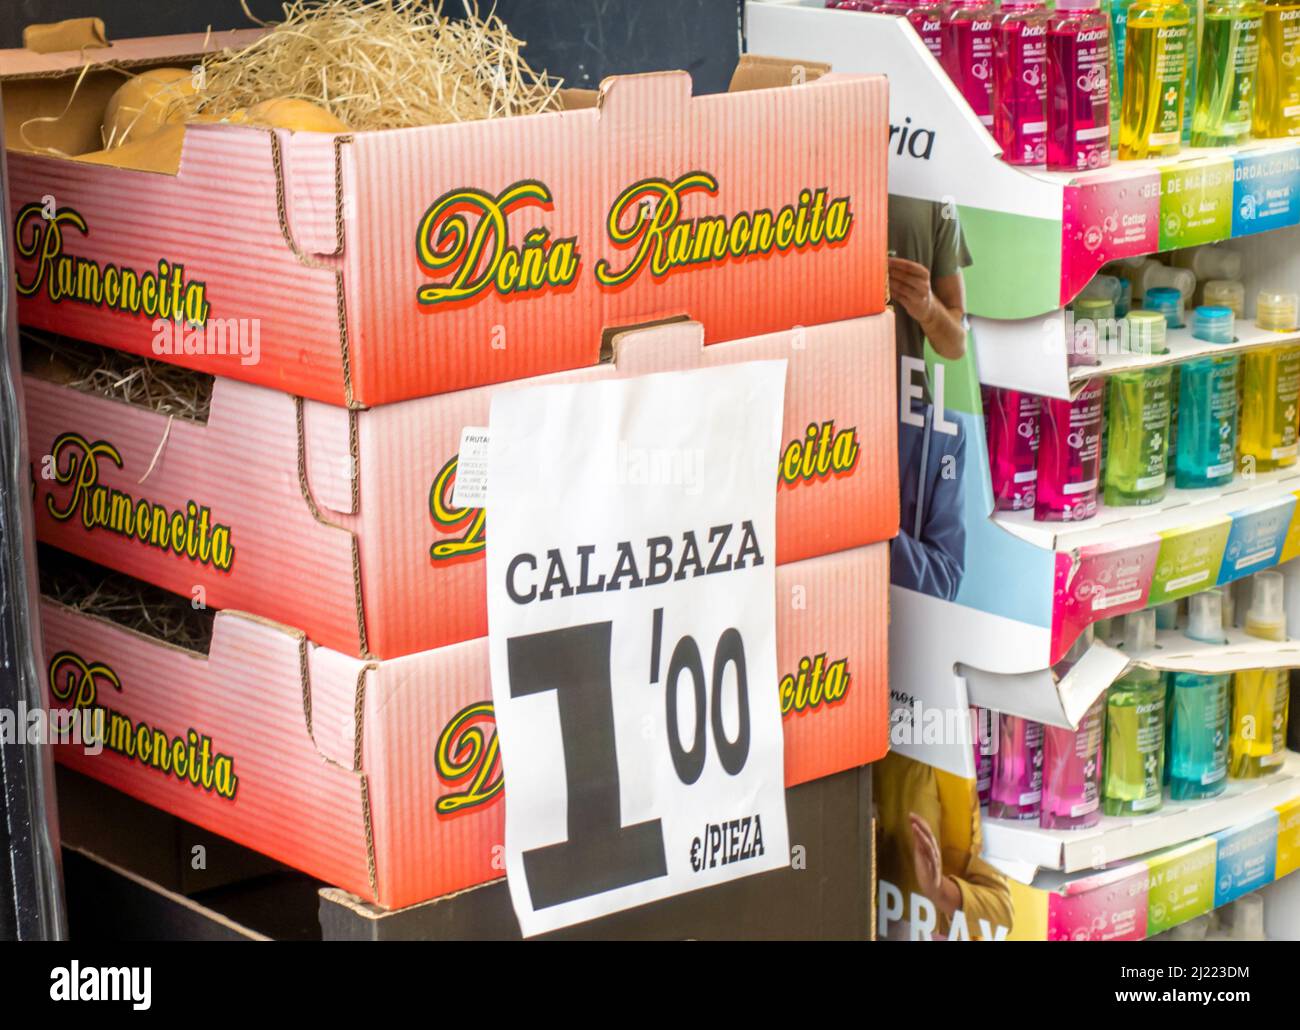 calabaza sqush with price tag in madrid supermarket Stock Photo